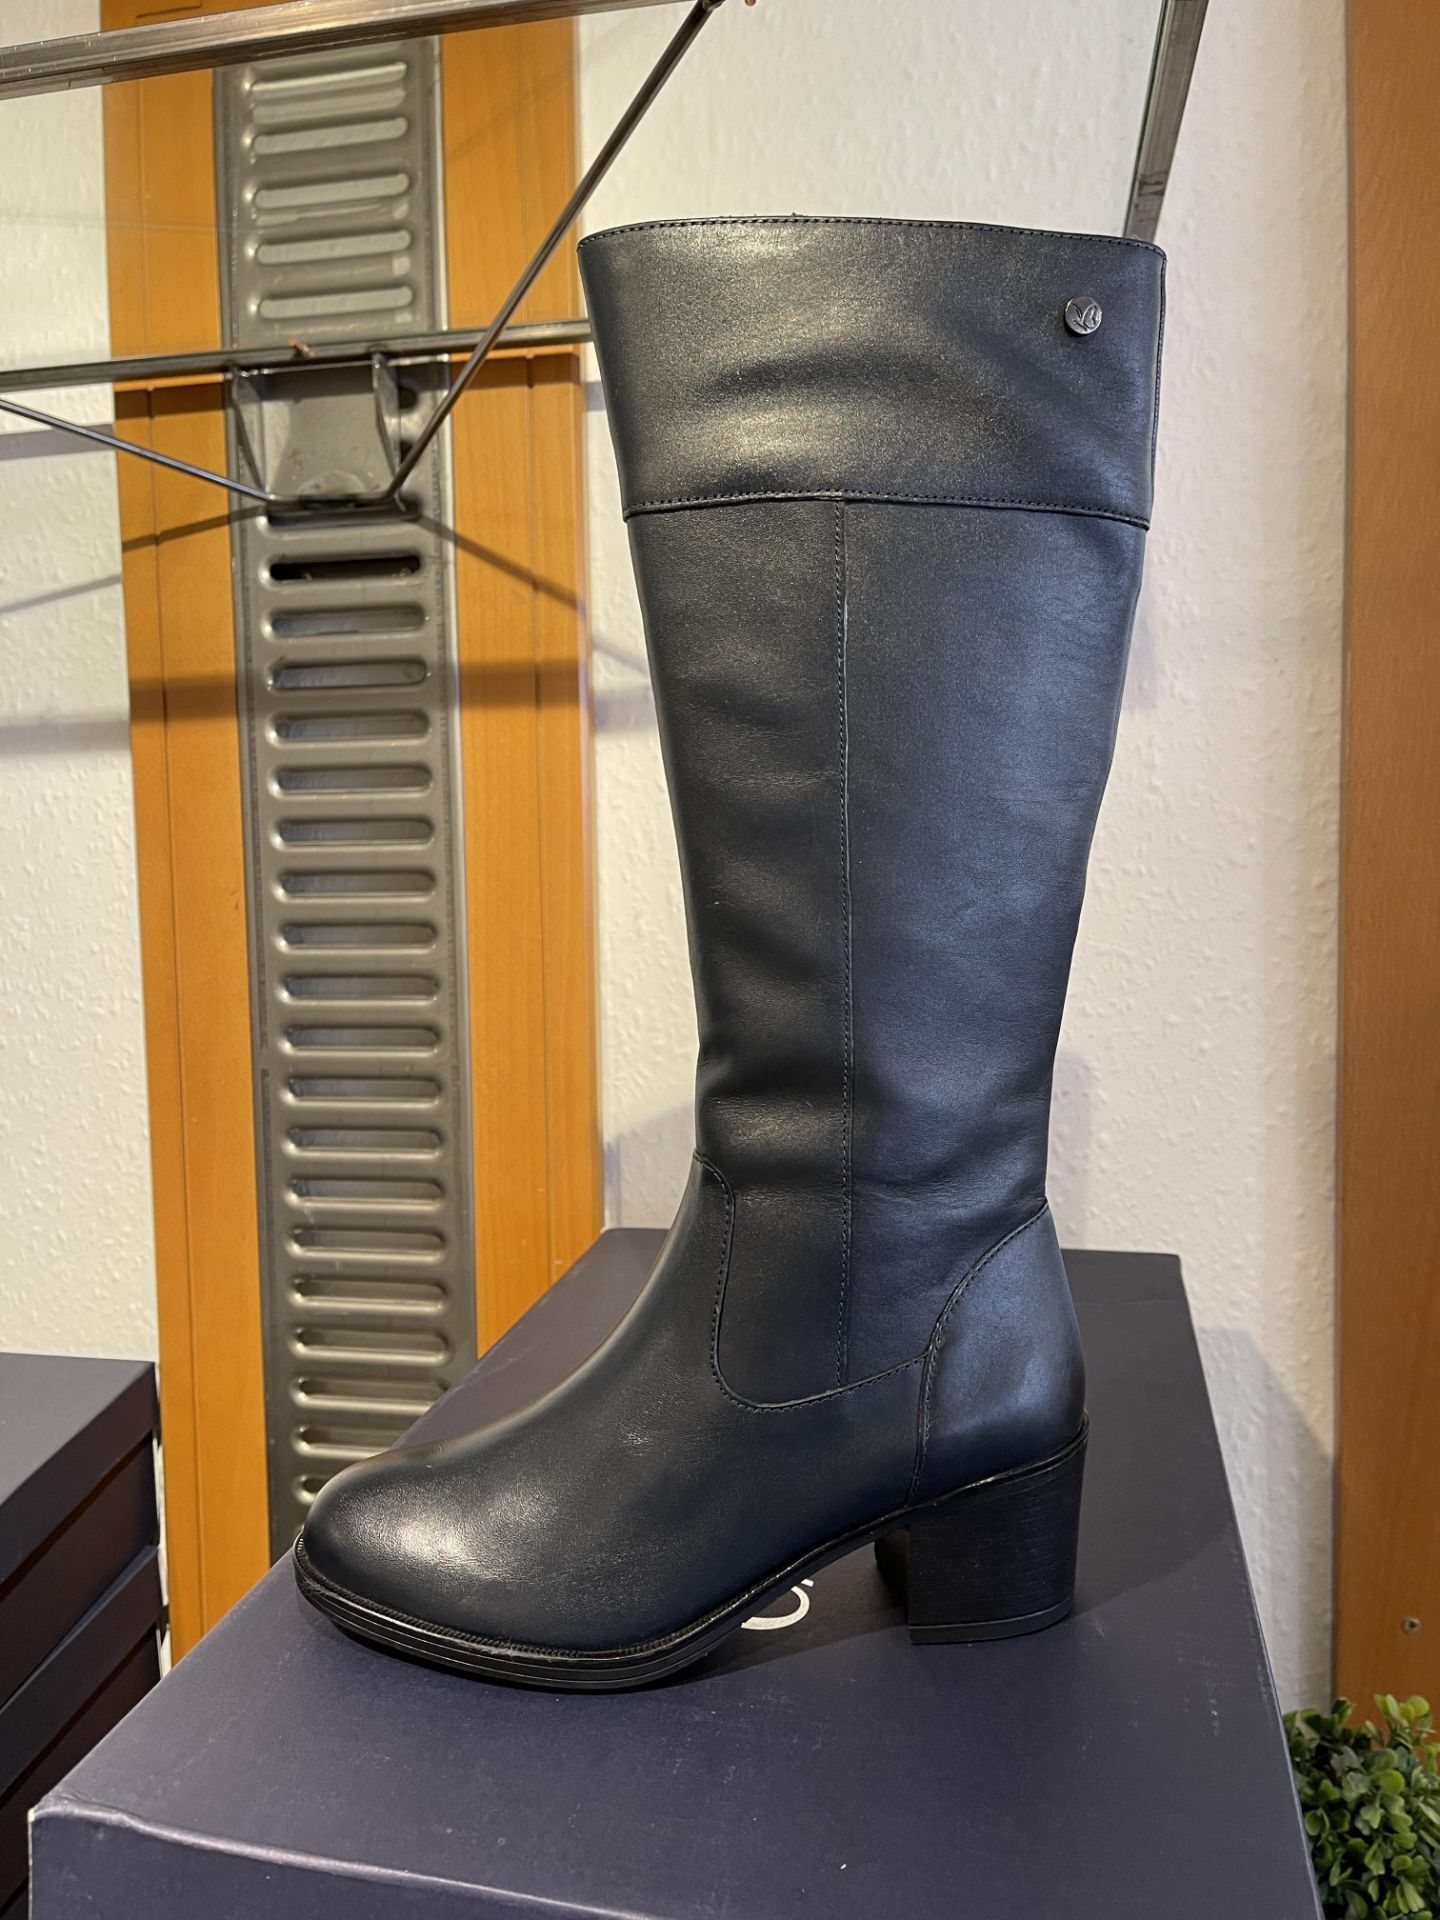 Caprice 4 Pairs: Ocean Nappa Boots 9-25551-25 855. Sizes 3.5, 4, & 6 (RRP £89.99) Caprice 3 Pairs: